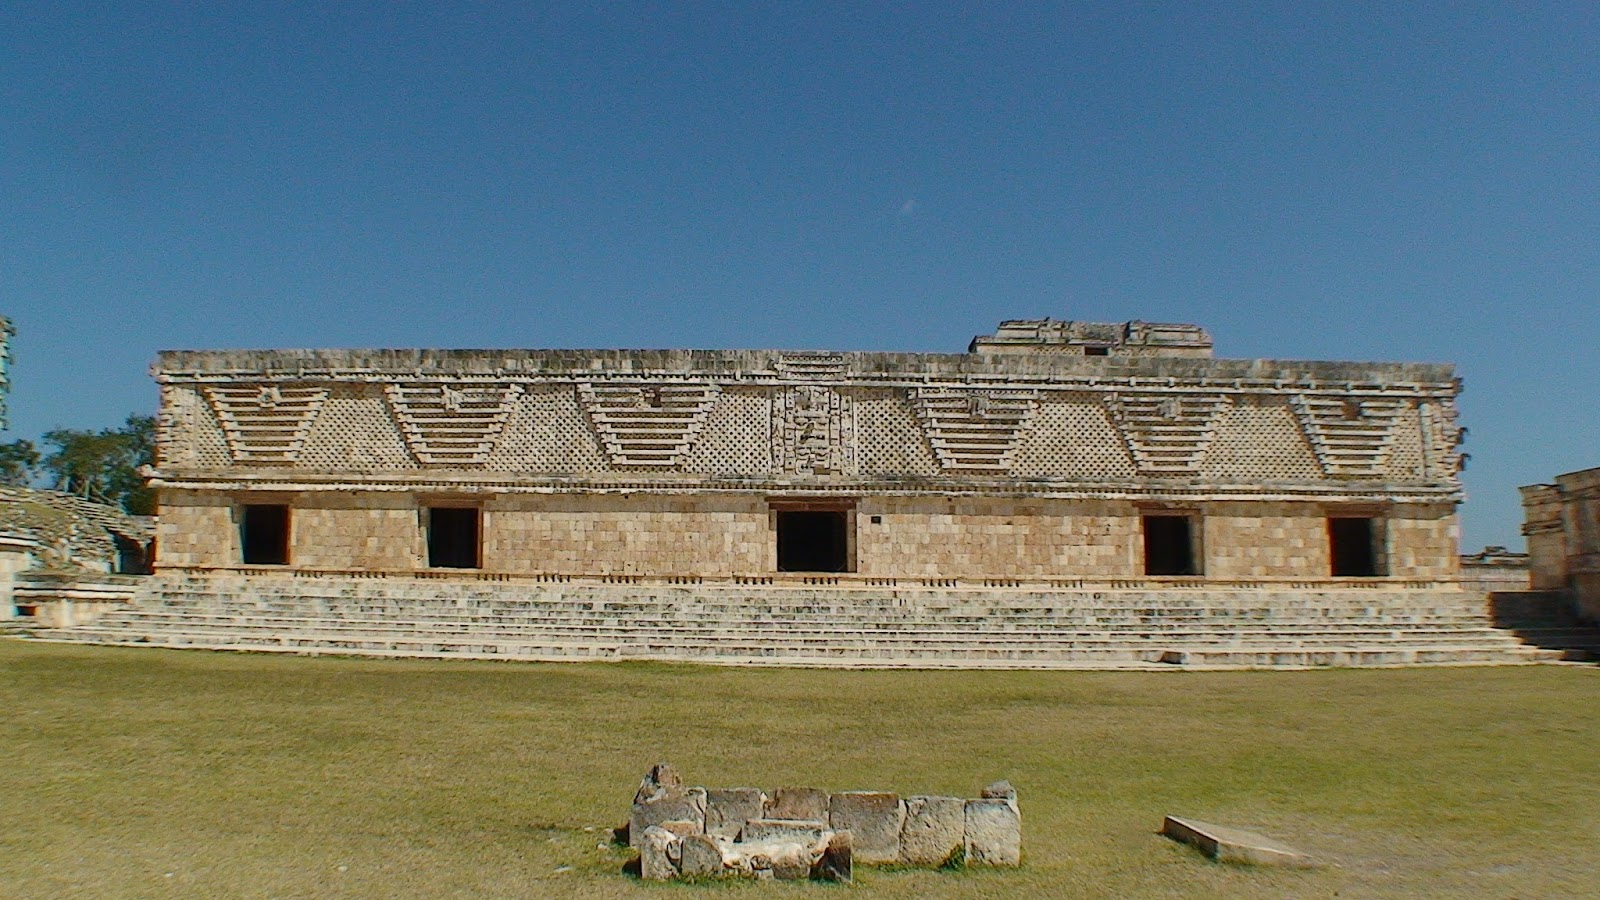 From Indians to Hot Dogs: Pre-Columbian architecture